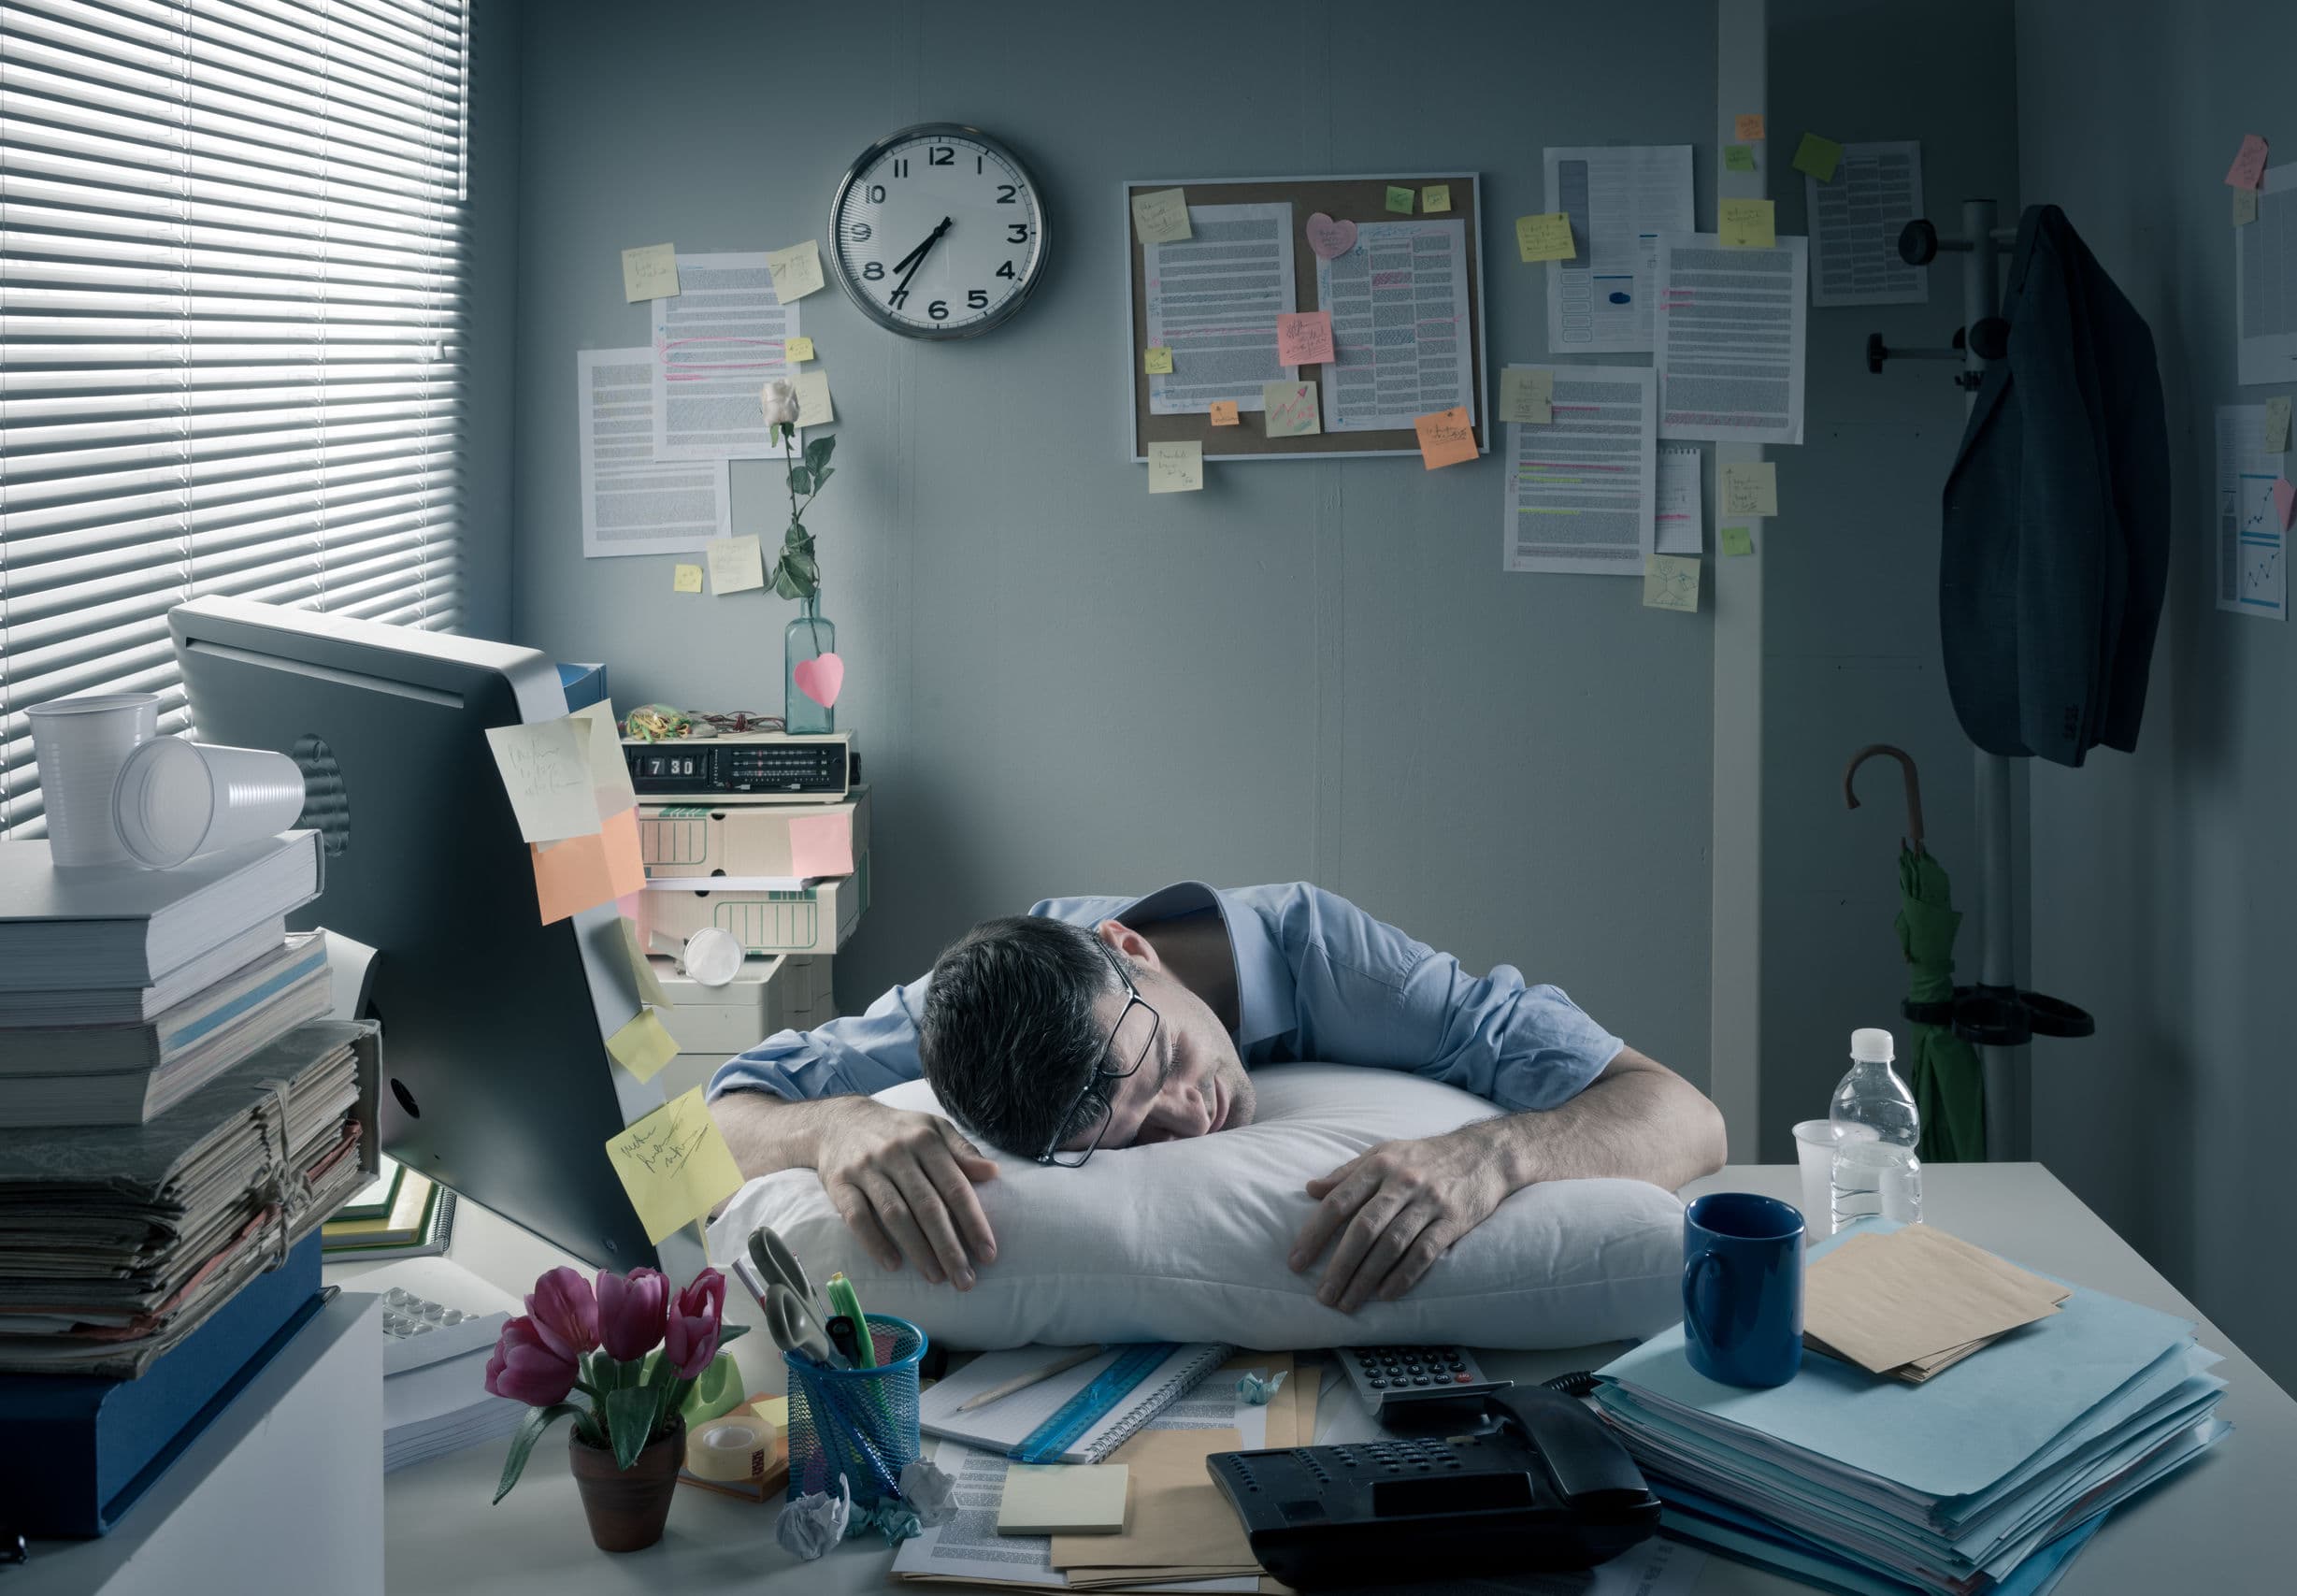 Workaholism: Are You a Workaholic?